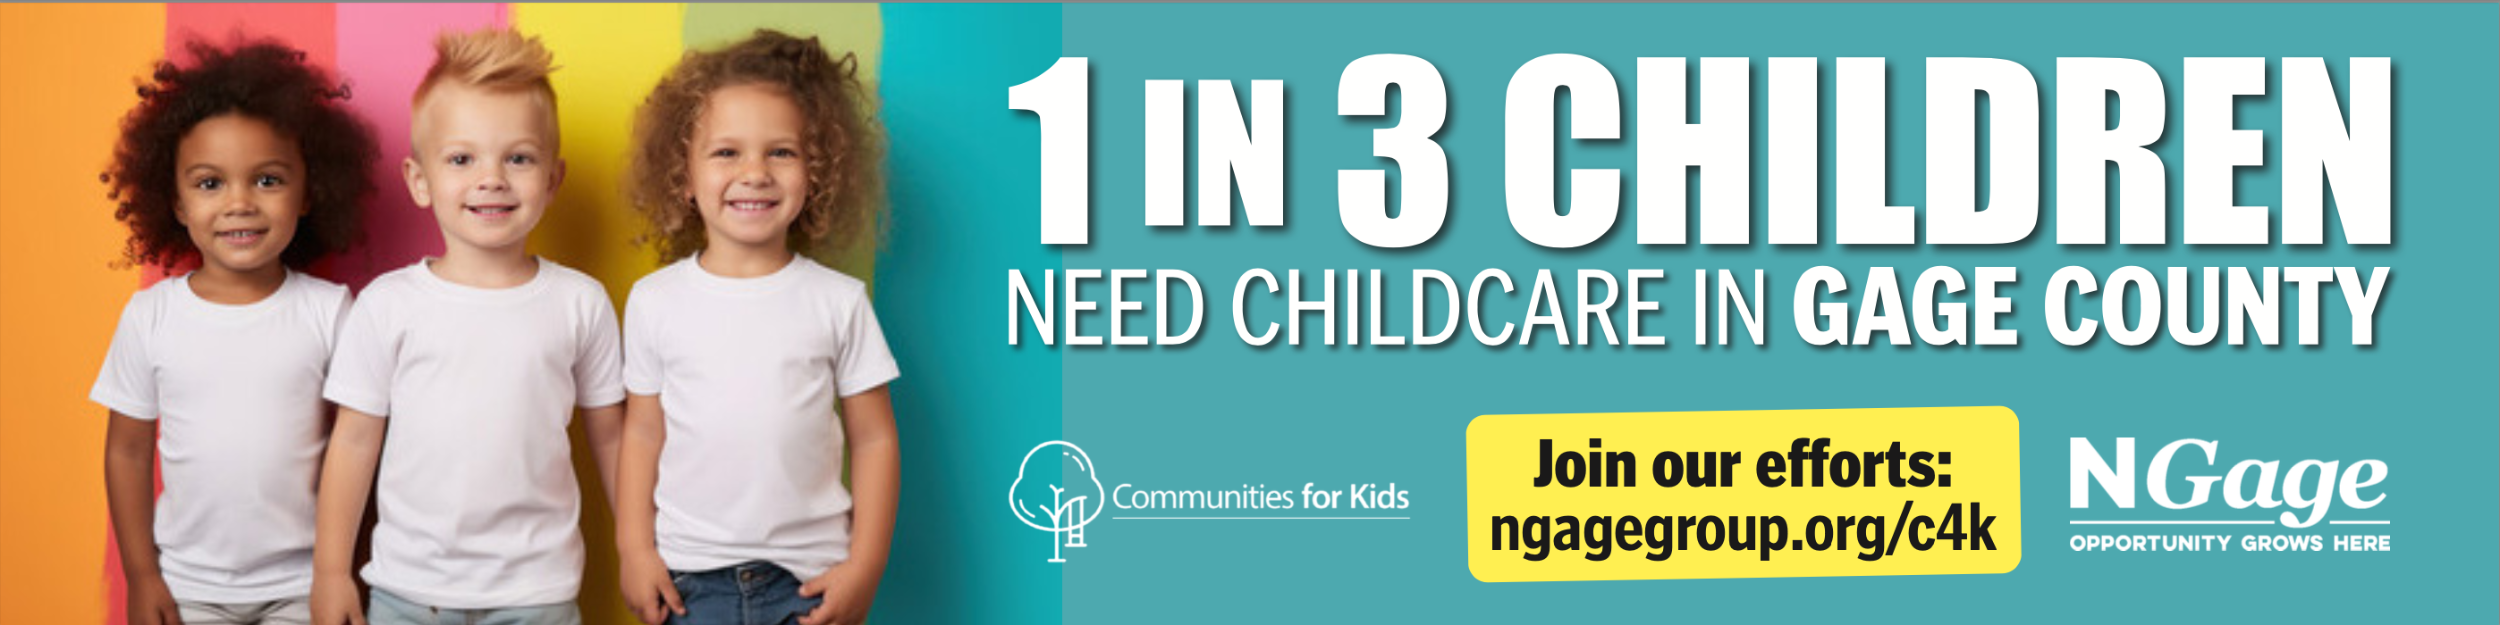 One in three children need childcare in Gage County